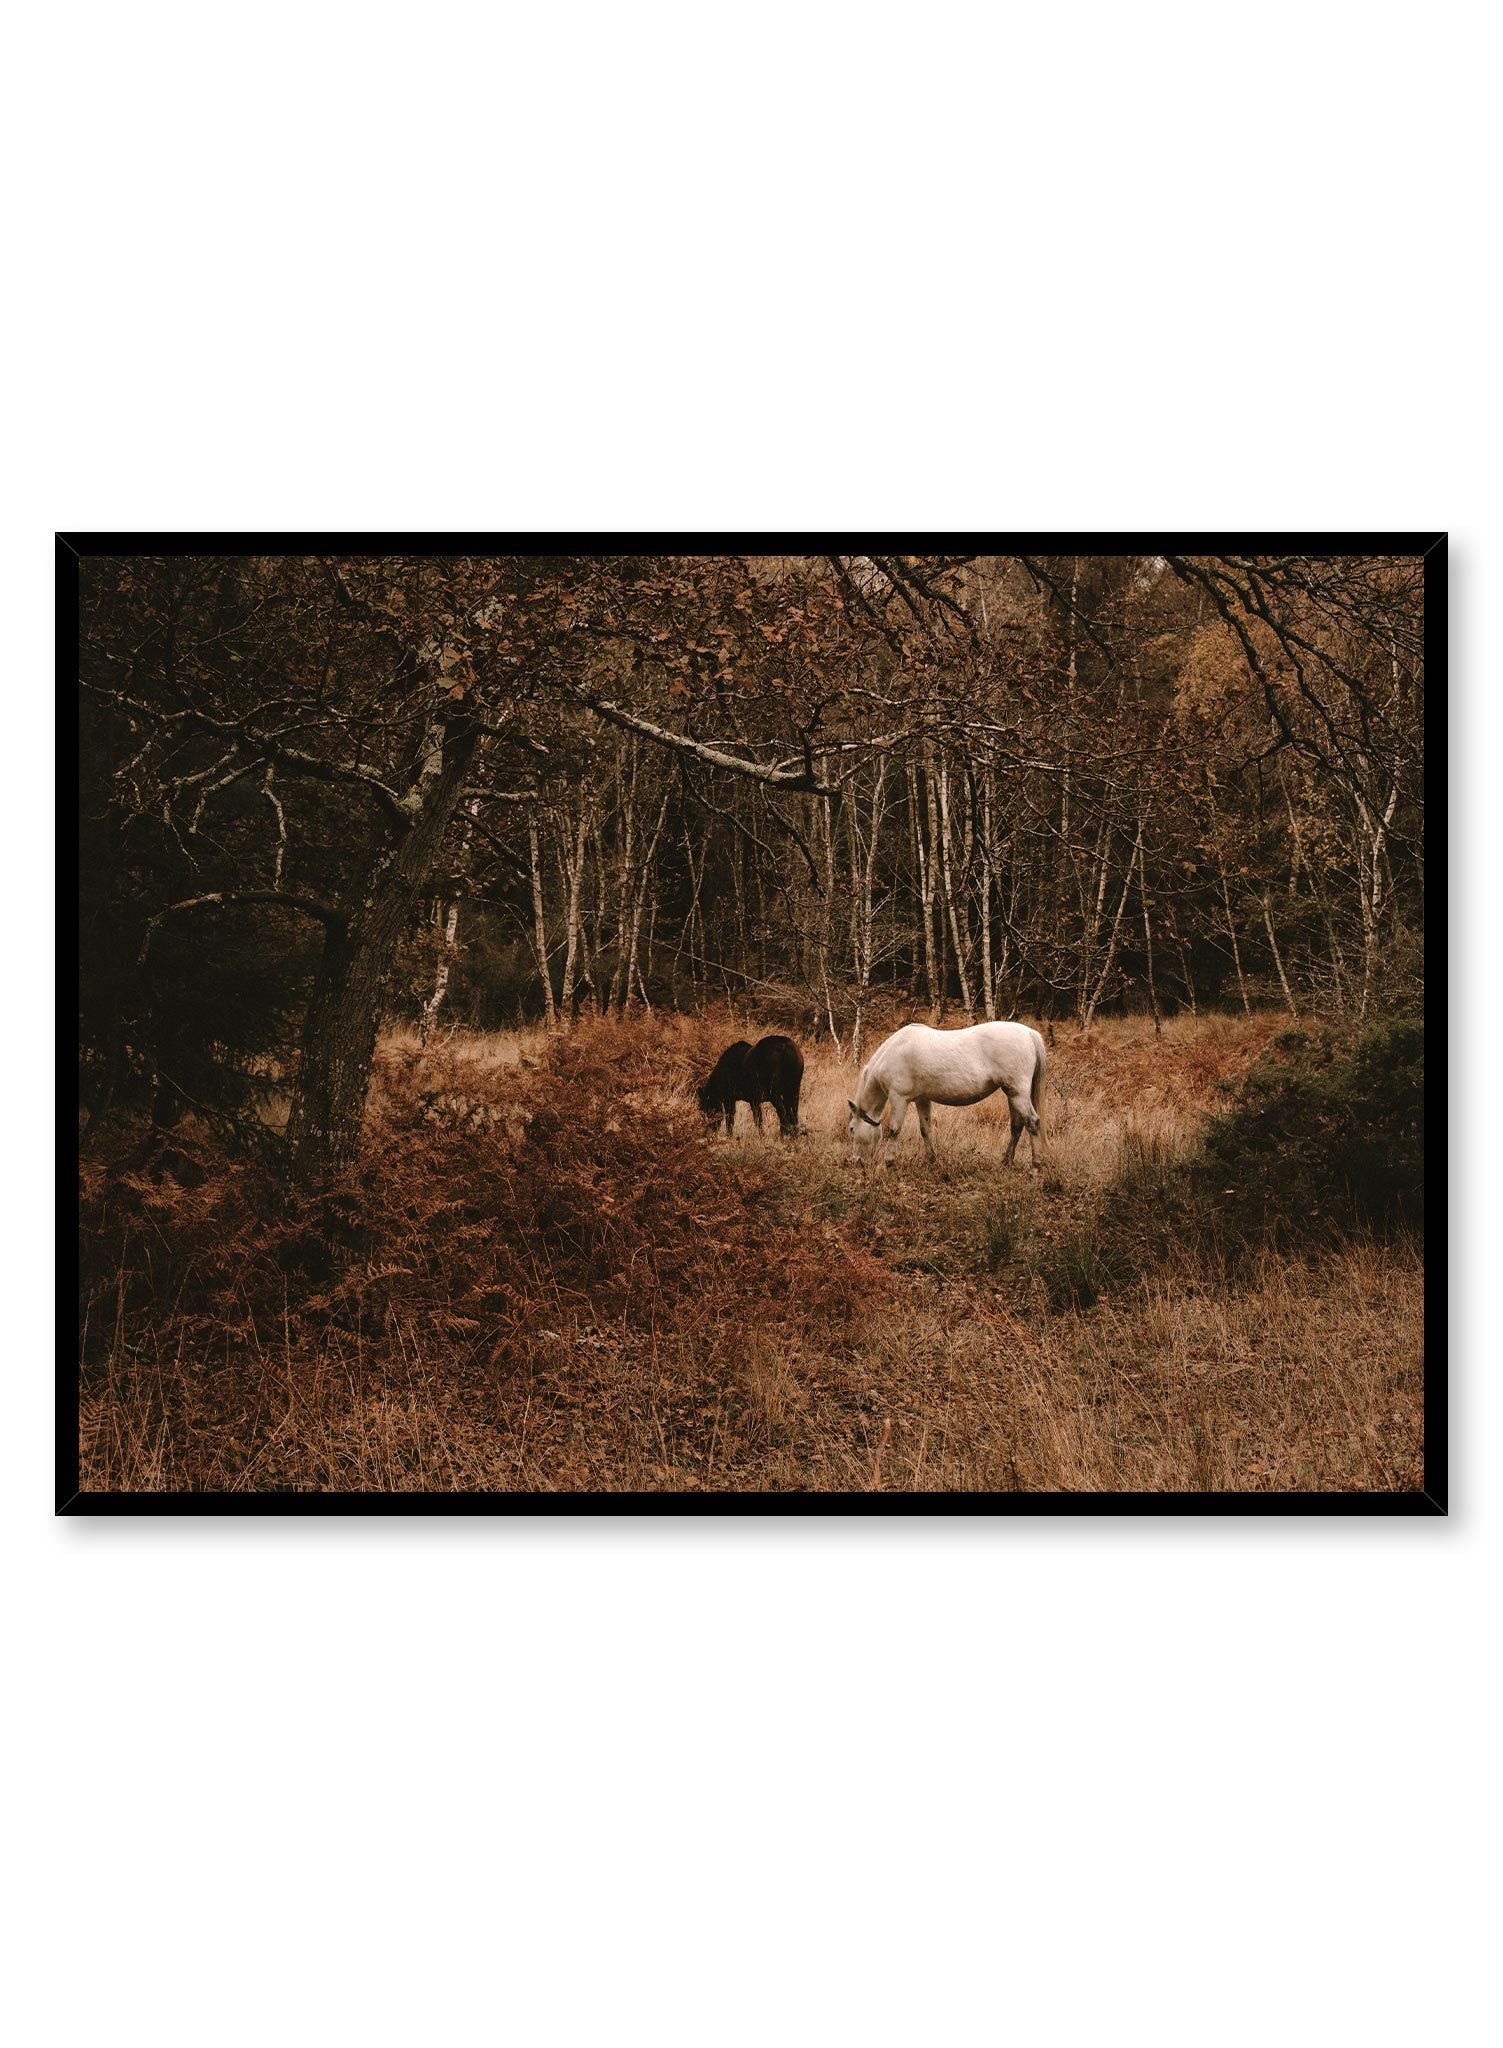 Mustang is a minimalist photography by Opposite Wall of two horses; one white and one black, eating dry grass in the forest. 